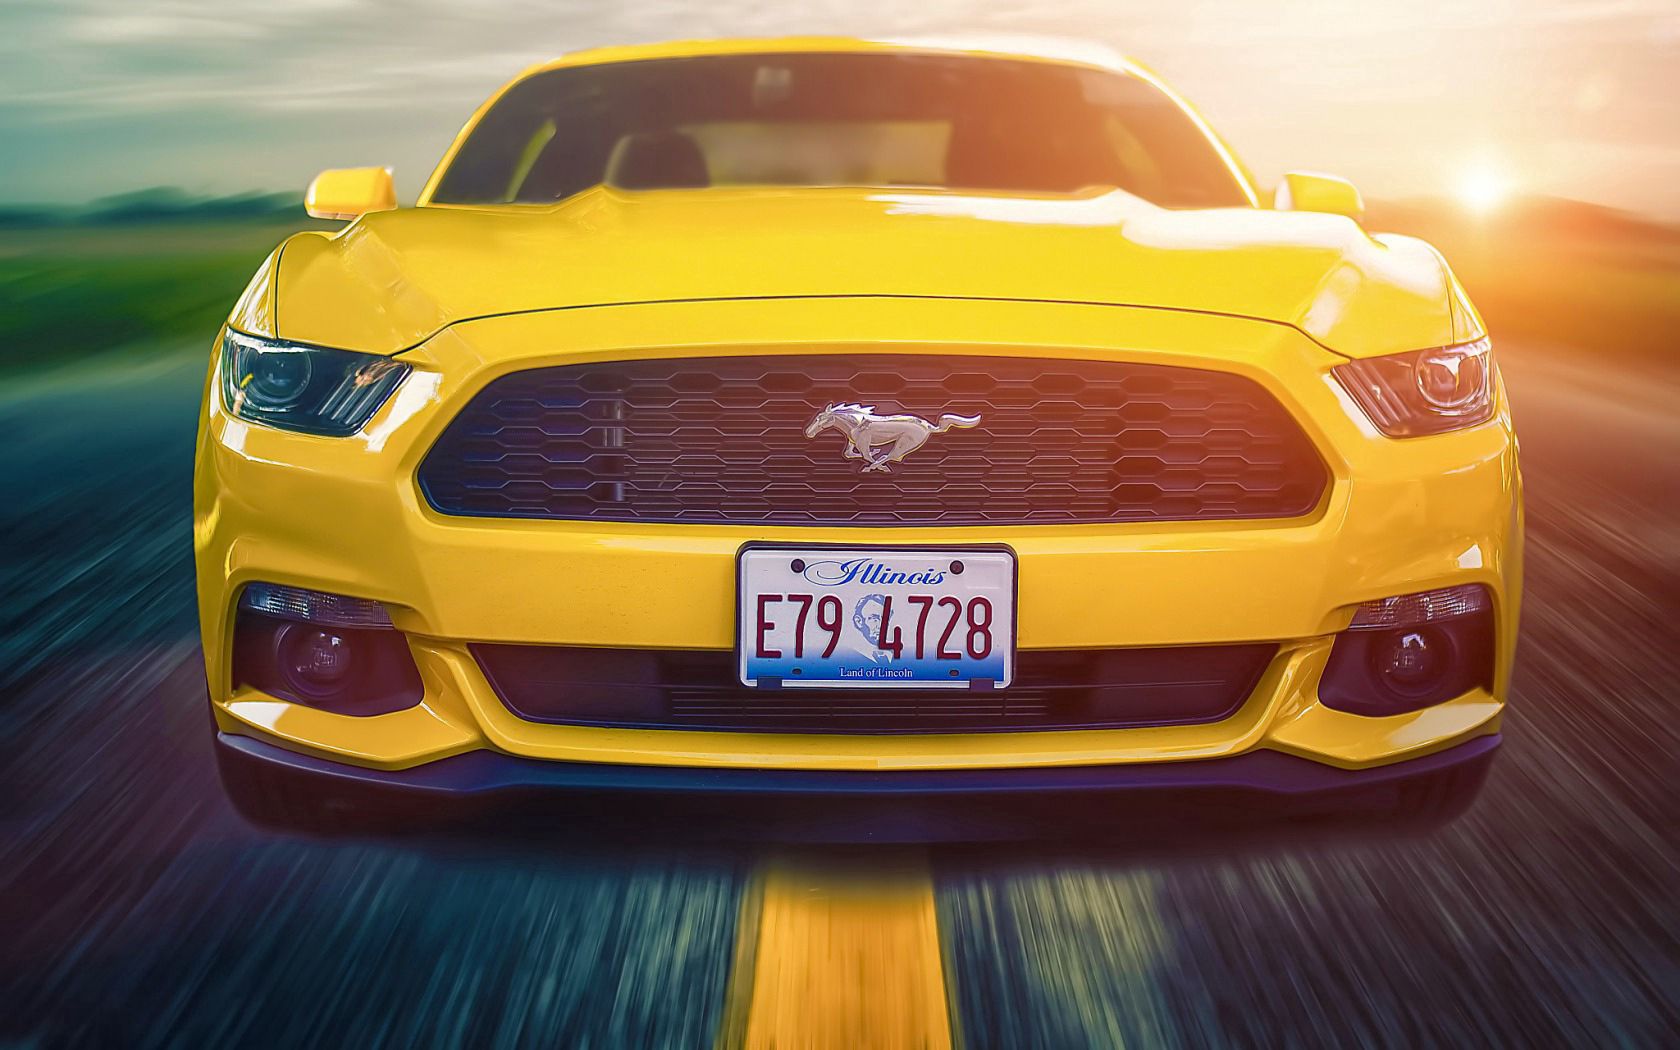 ford mustang, cars, yellow, front view, muscle car, 2015 cellphone